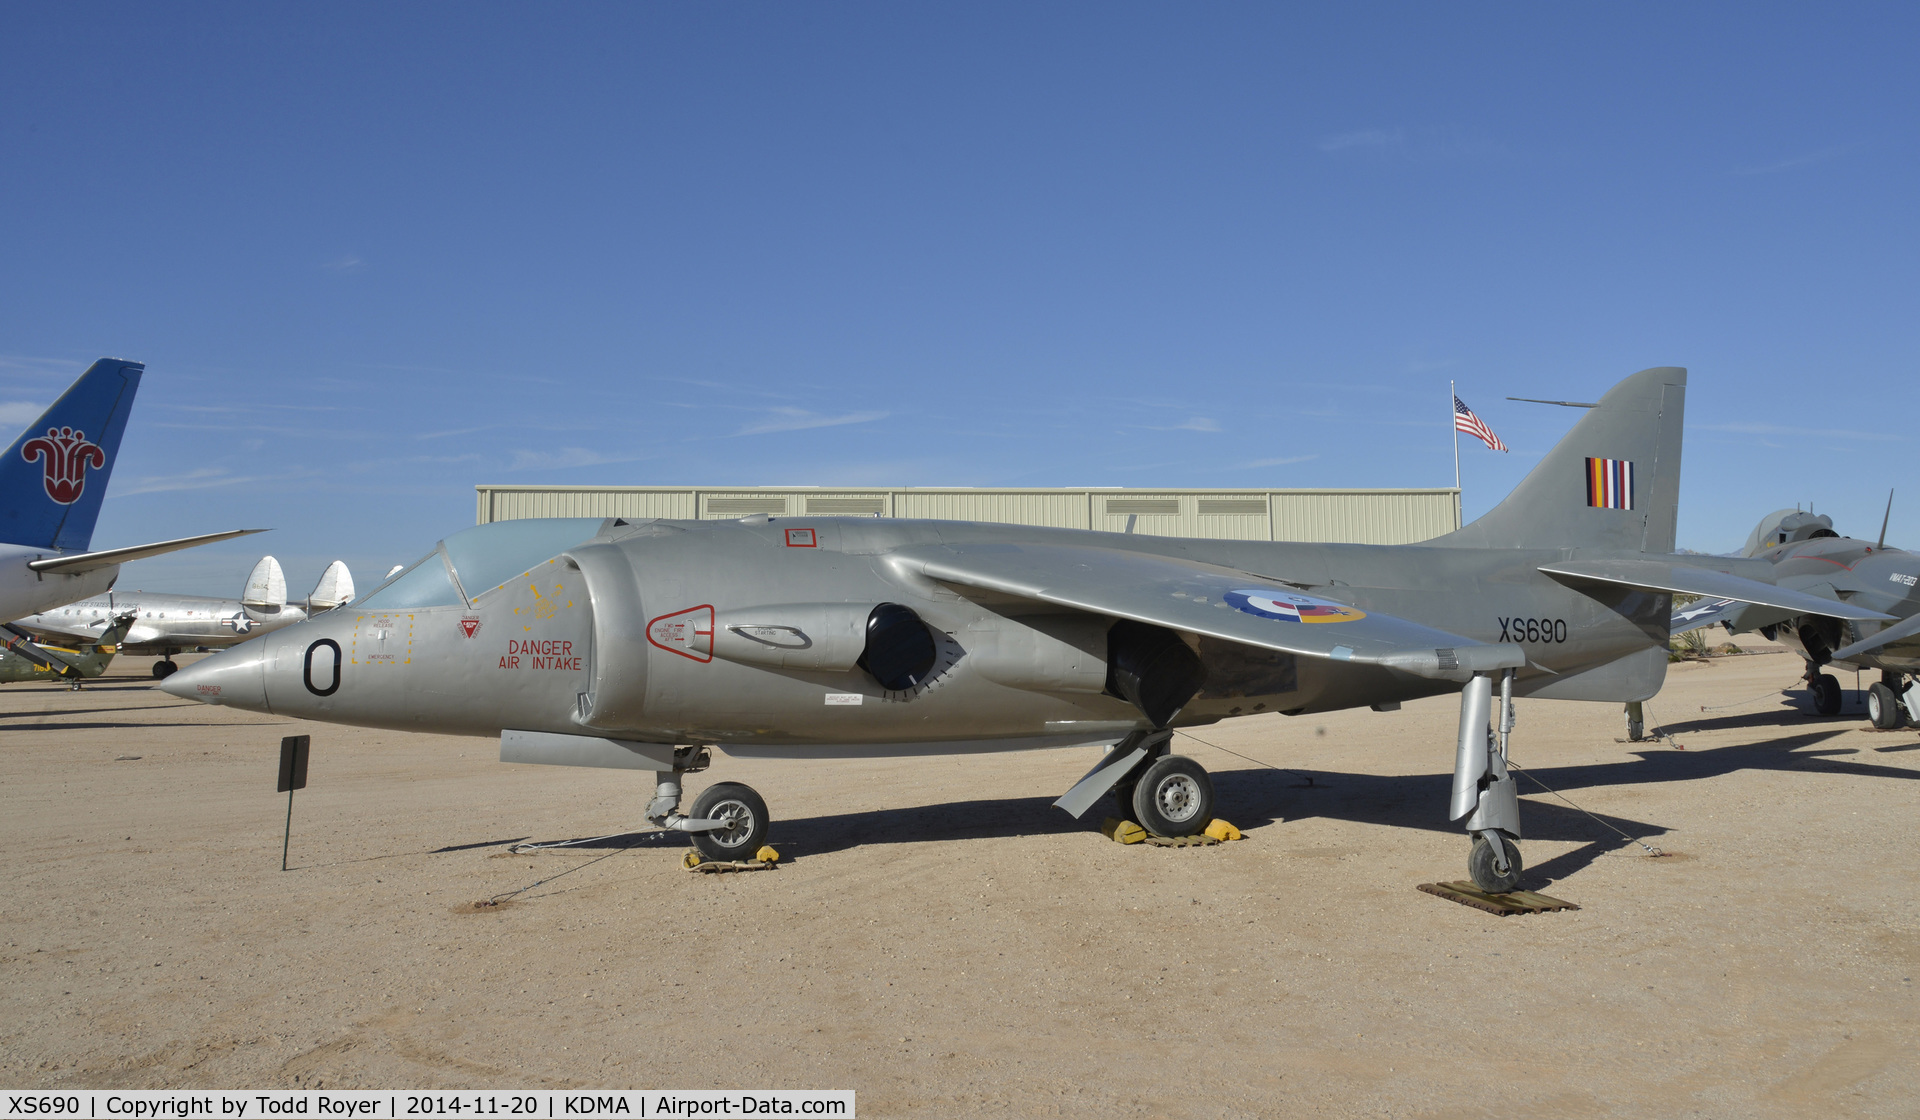 XS690, 1964 Hawker Siddeley XV-6A Kestrel C/N Not found XS690/64-18264, On Display at the Pima Air and Space Museum